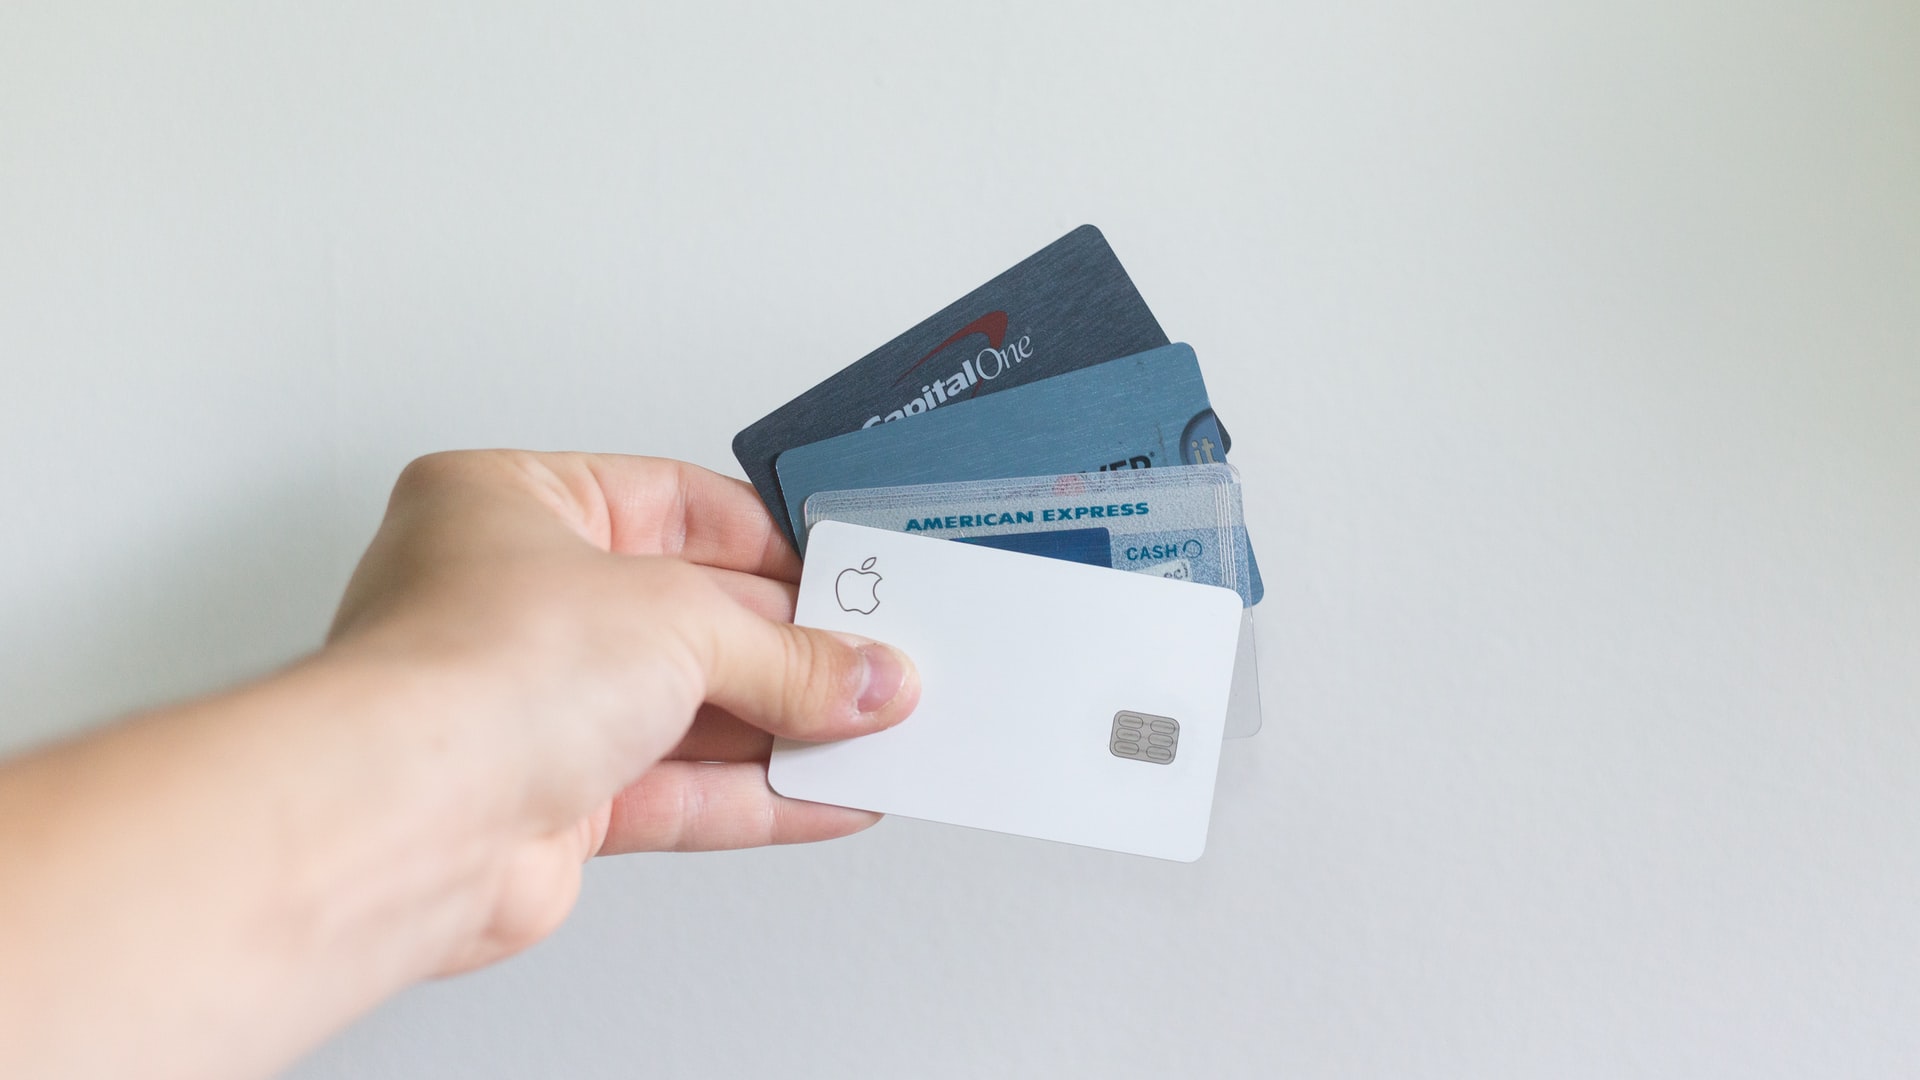 Check out the 5 easy steps and pick the best credit card for you! Source: Unsplash.